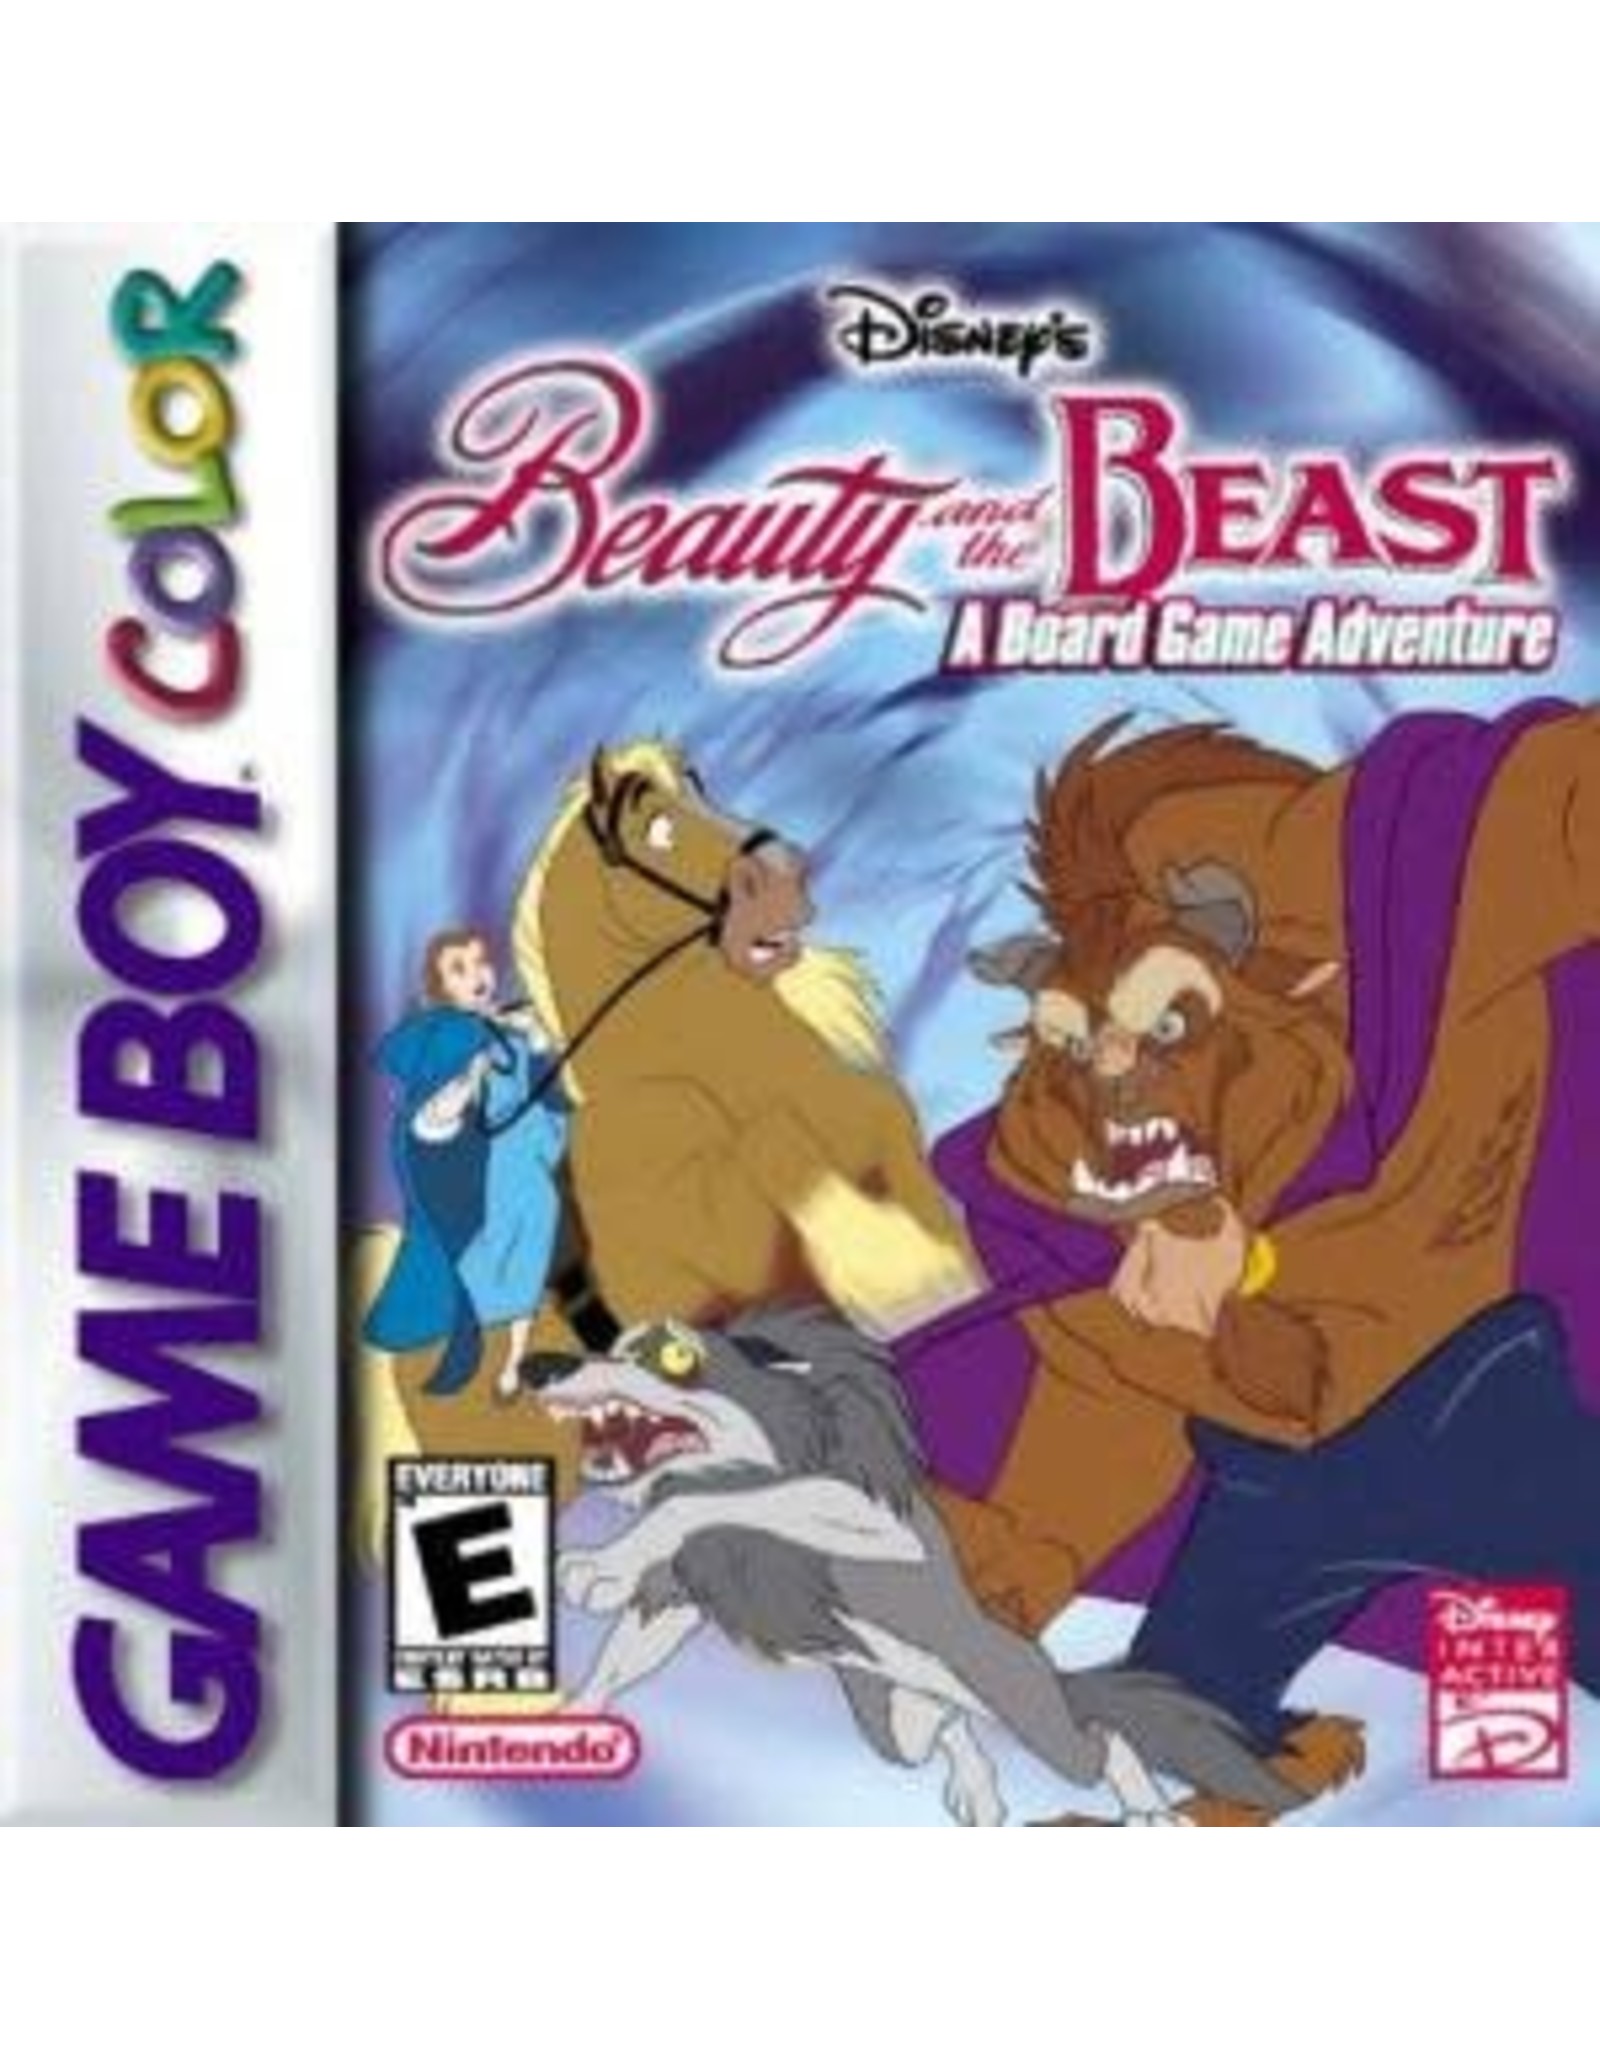 Game Boy Color Beauty and the Beast A Board Game Adventure (Cart Only)